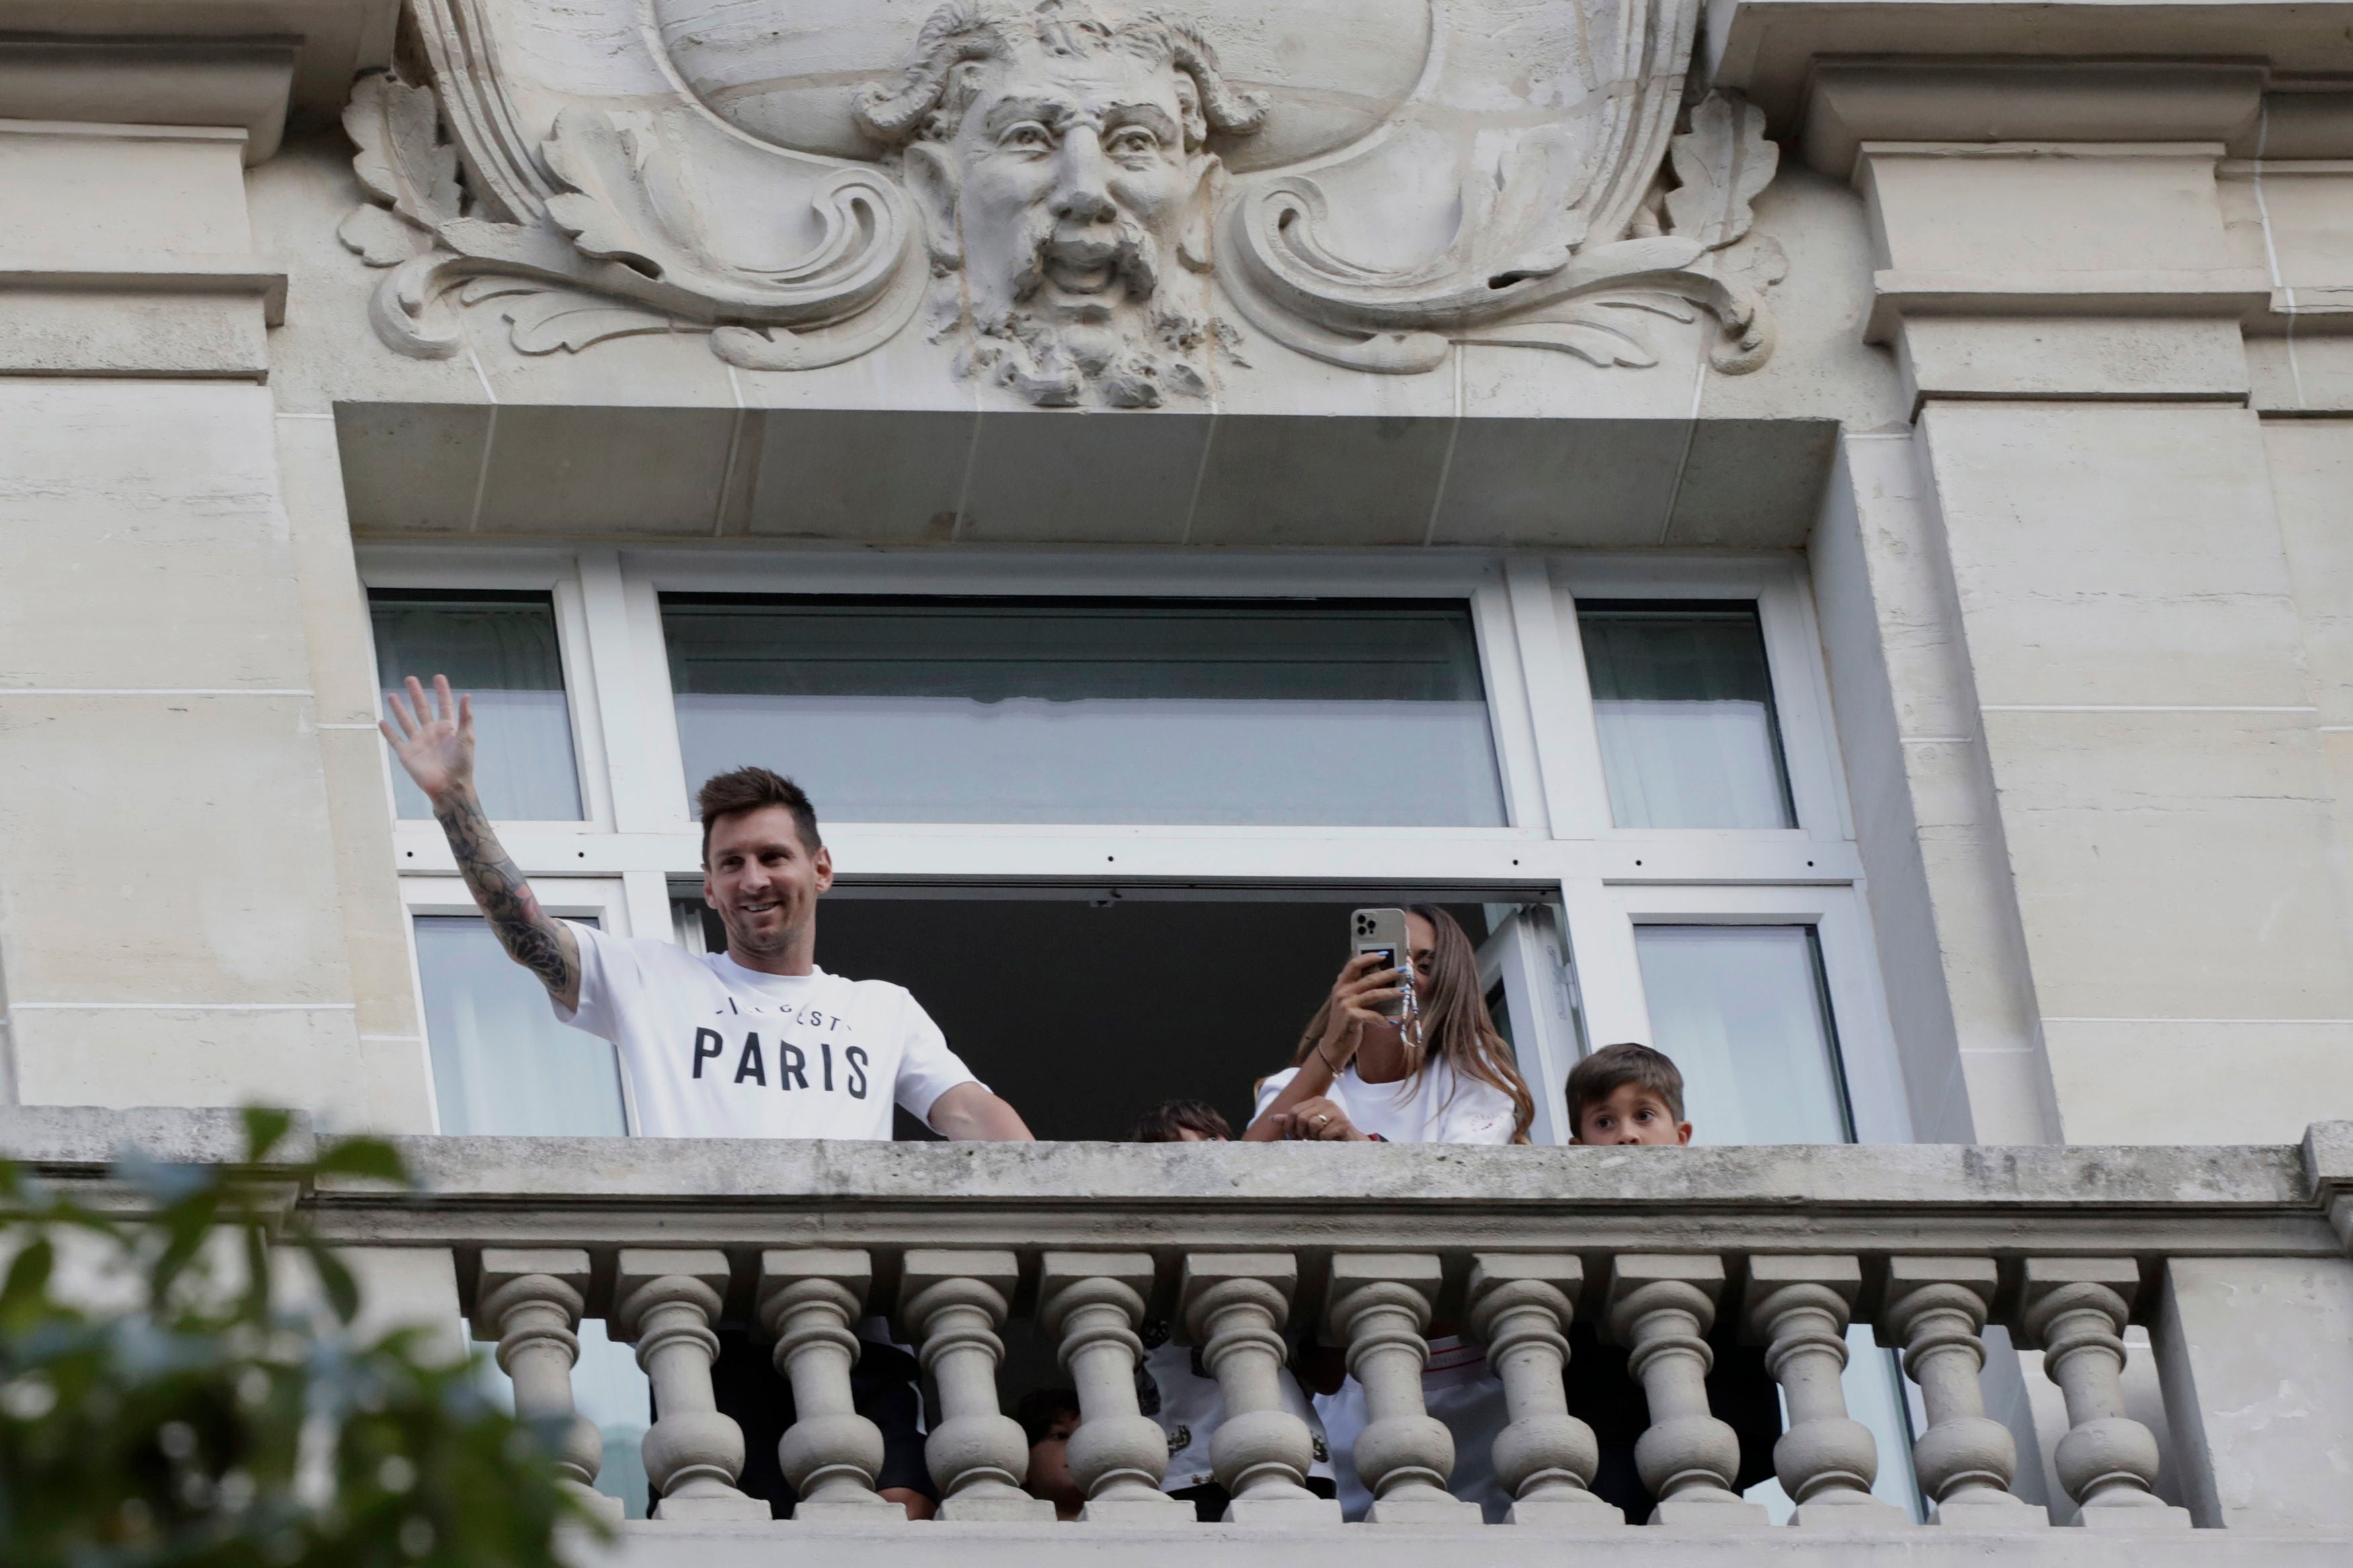 Lionel Messi, who has completed his move to Paris St Germain, waves to supporters from his hotel balcony (Adrienne Surprenant/AP).